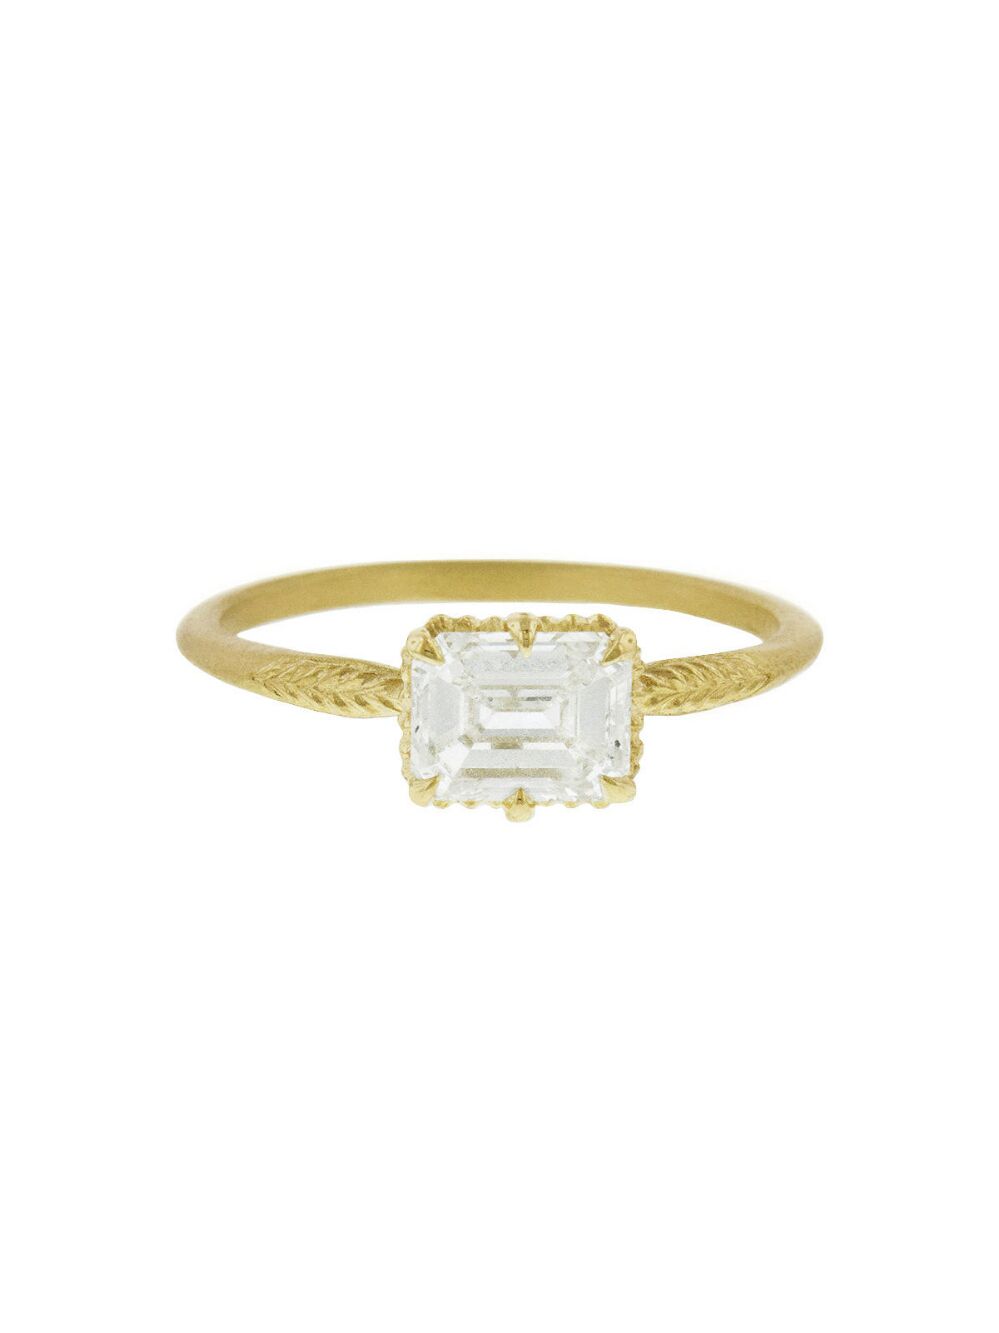 east west engagement rings gold emerald cut diamond ring